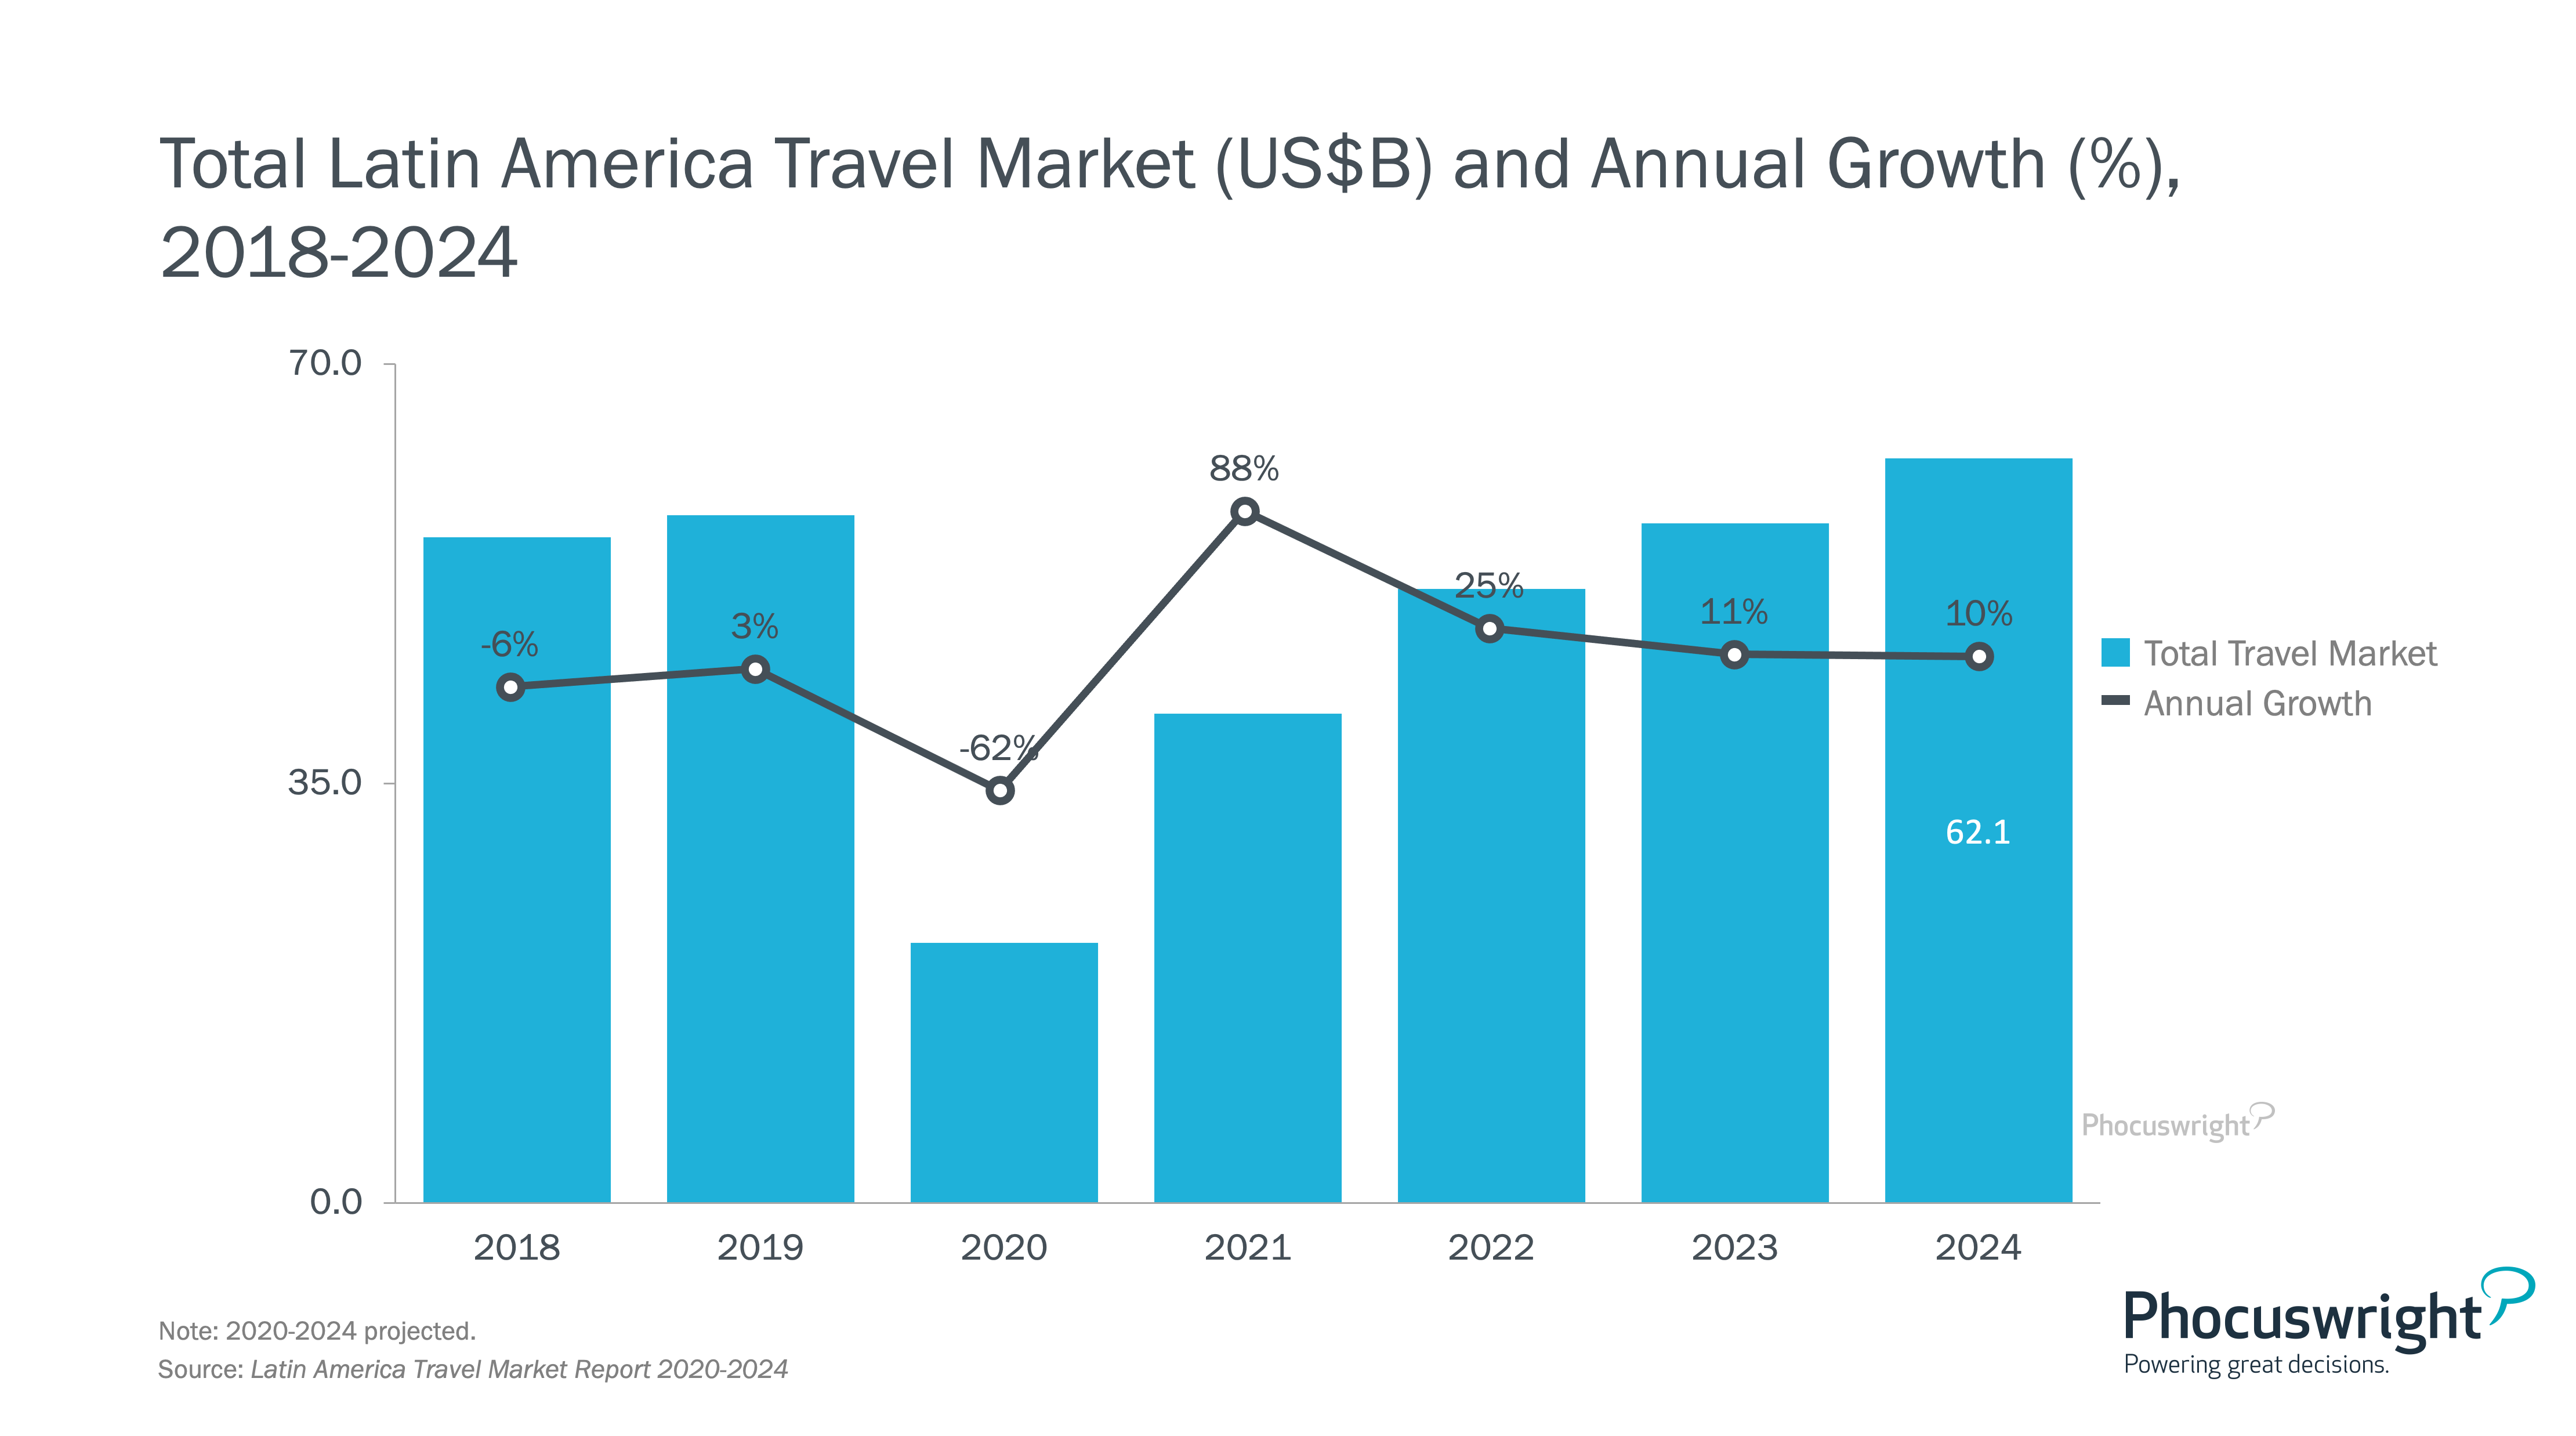 Travel Demand Persists for Latin America, but Recession and Hotel